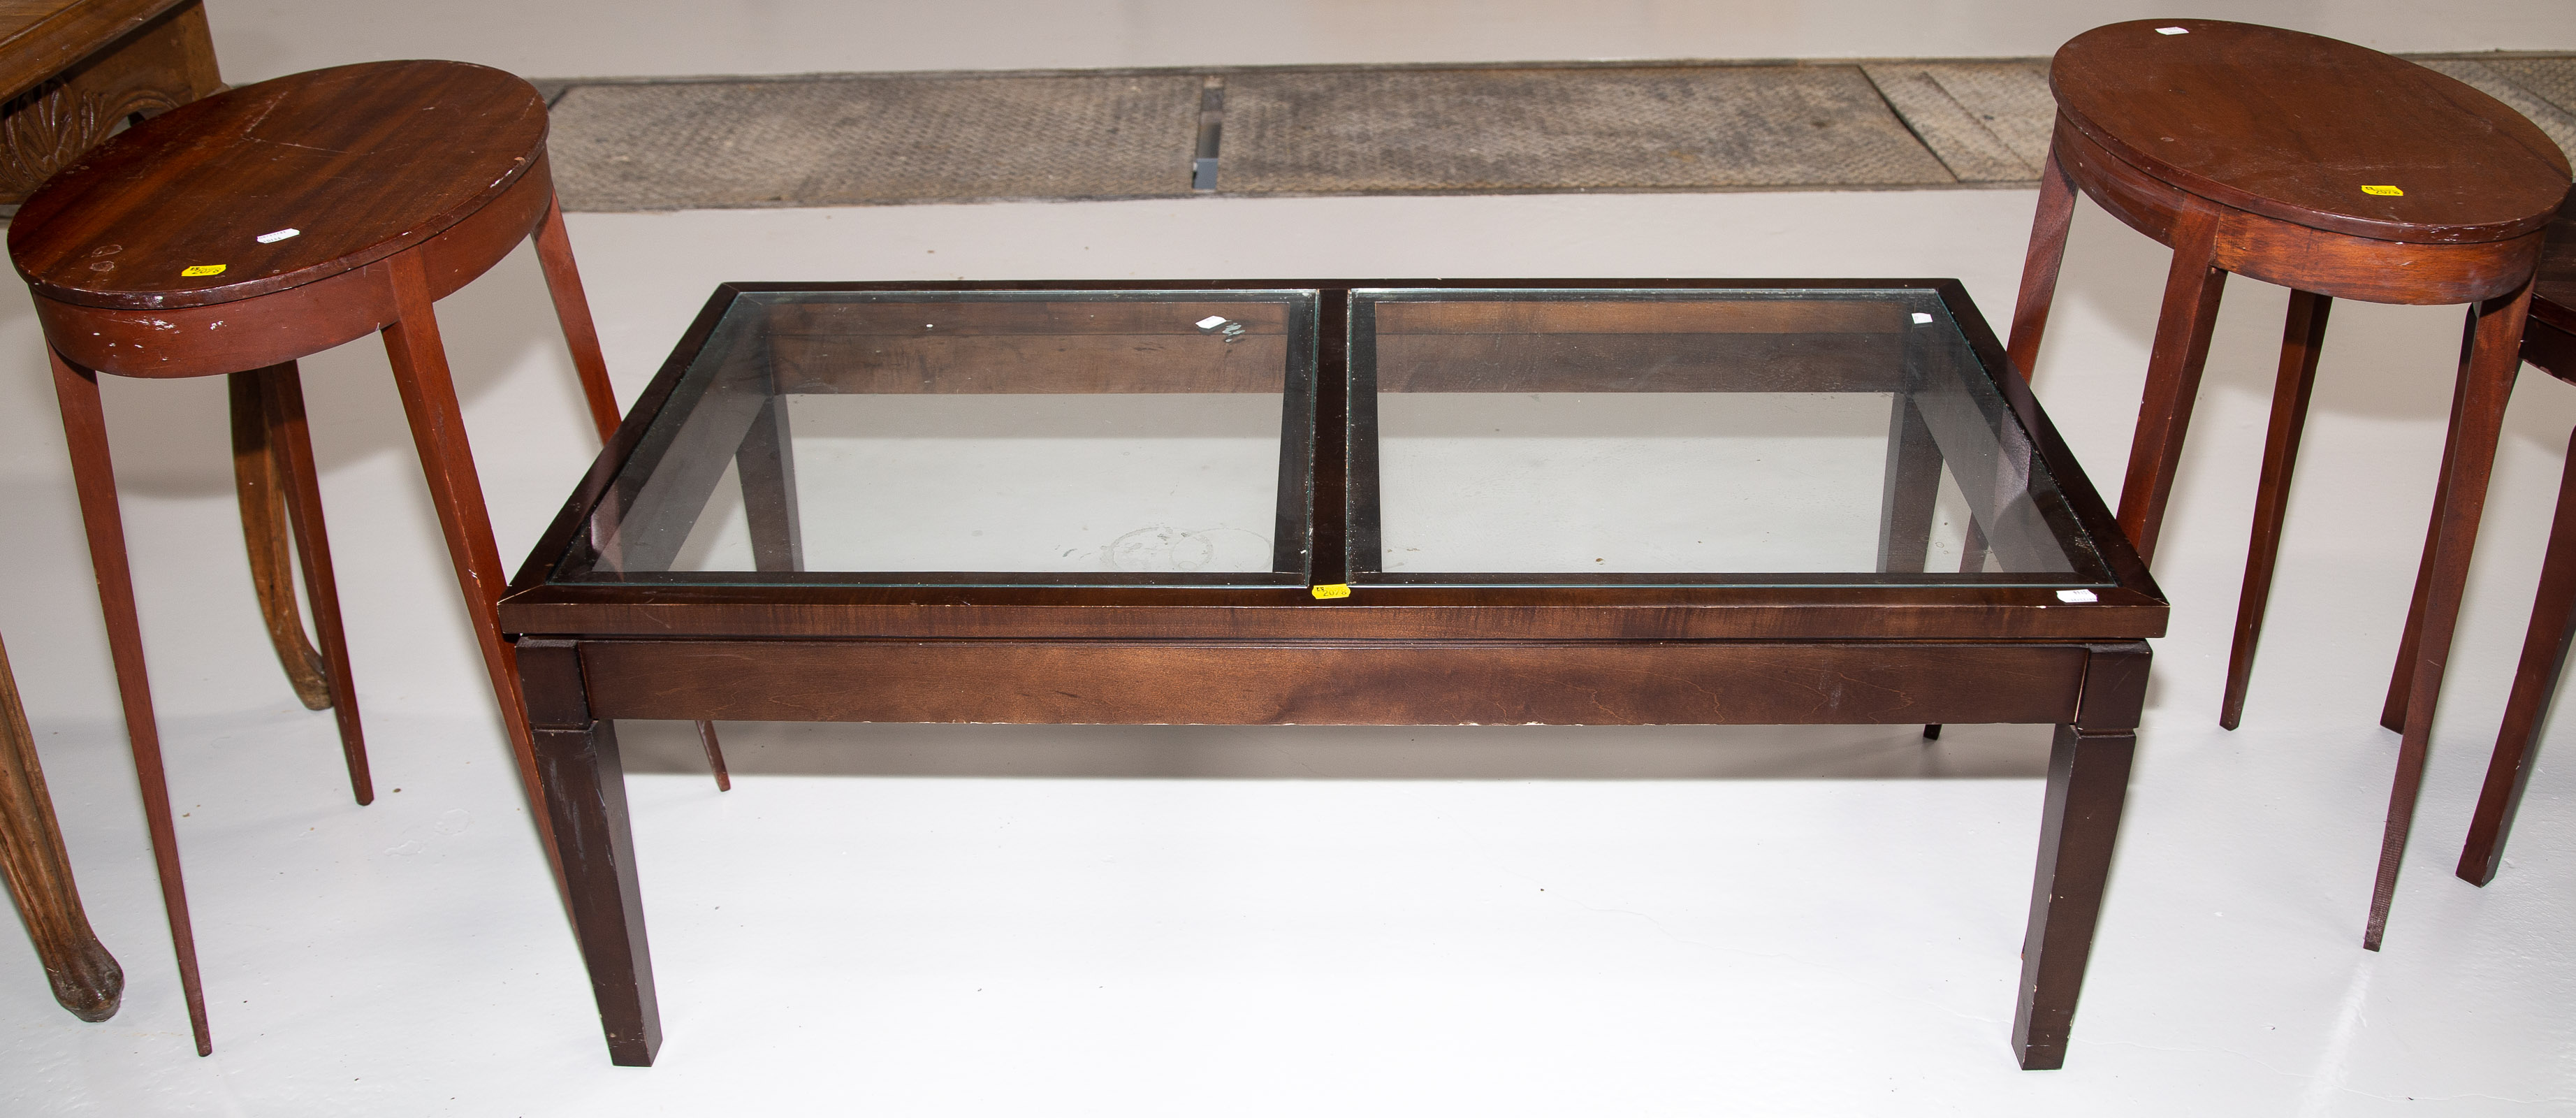 COFFEE TABLE WITH GLASS INSERTS & TWO